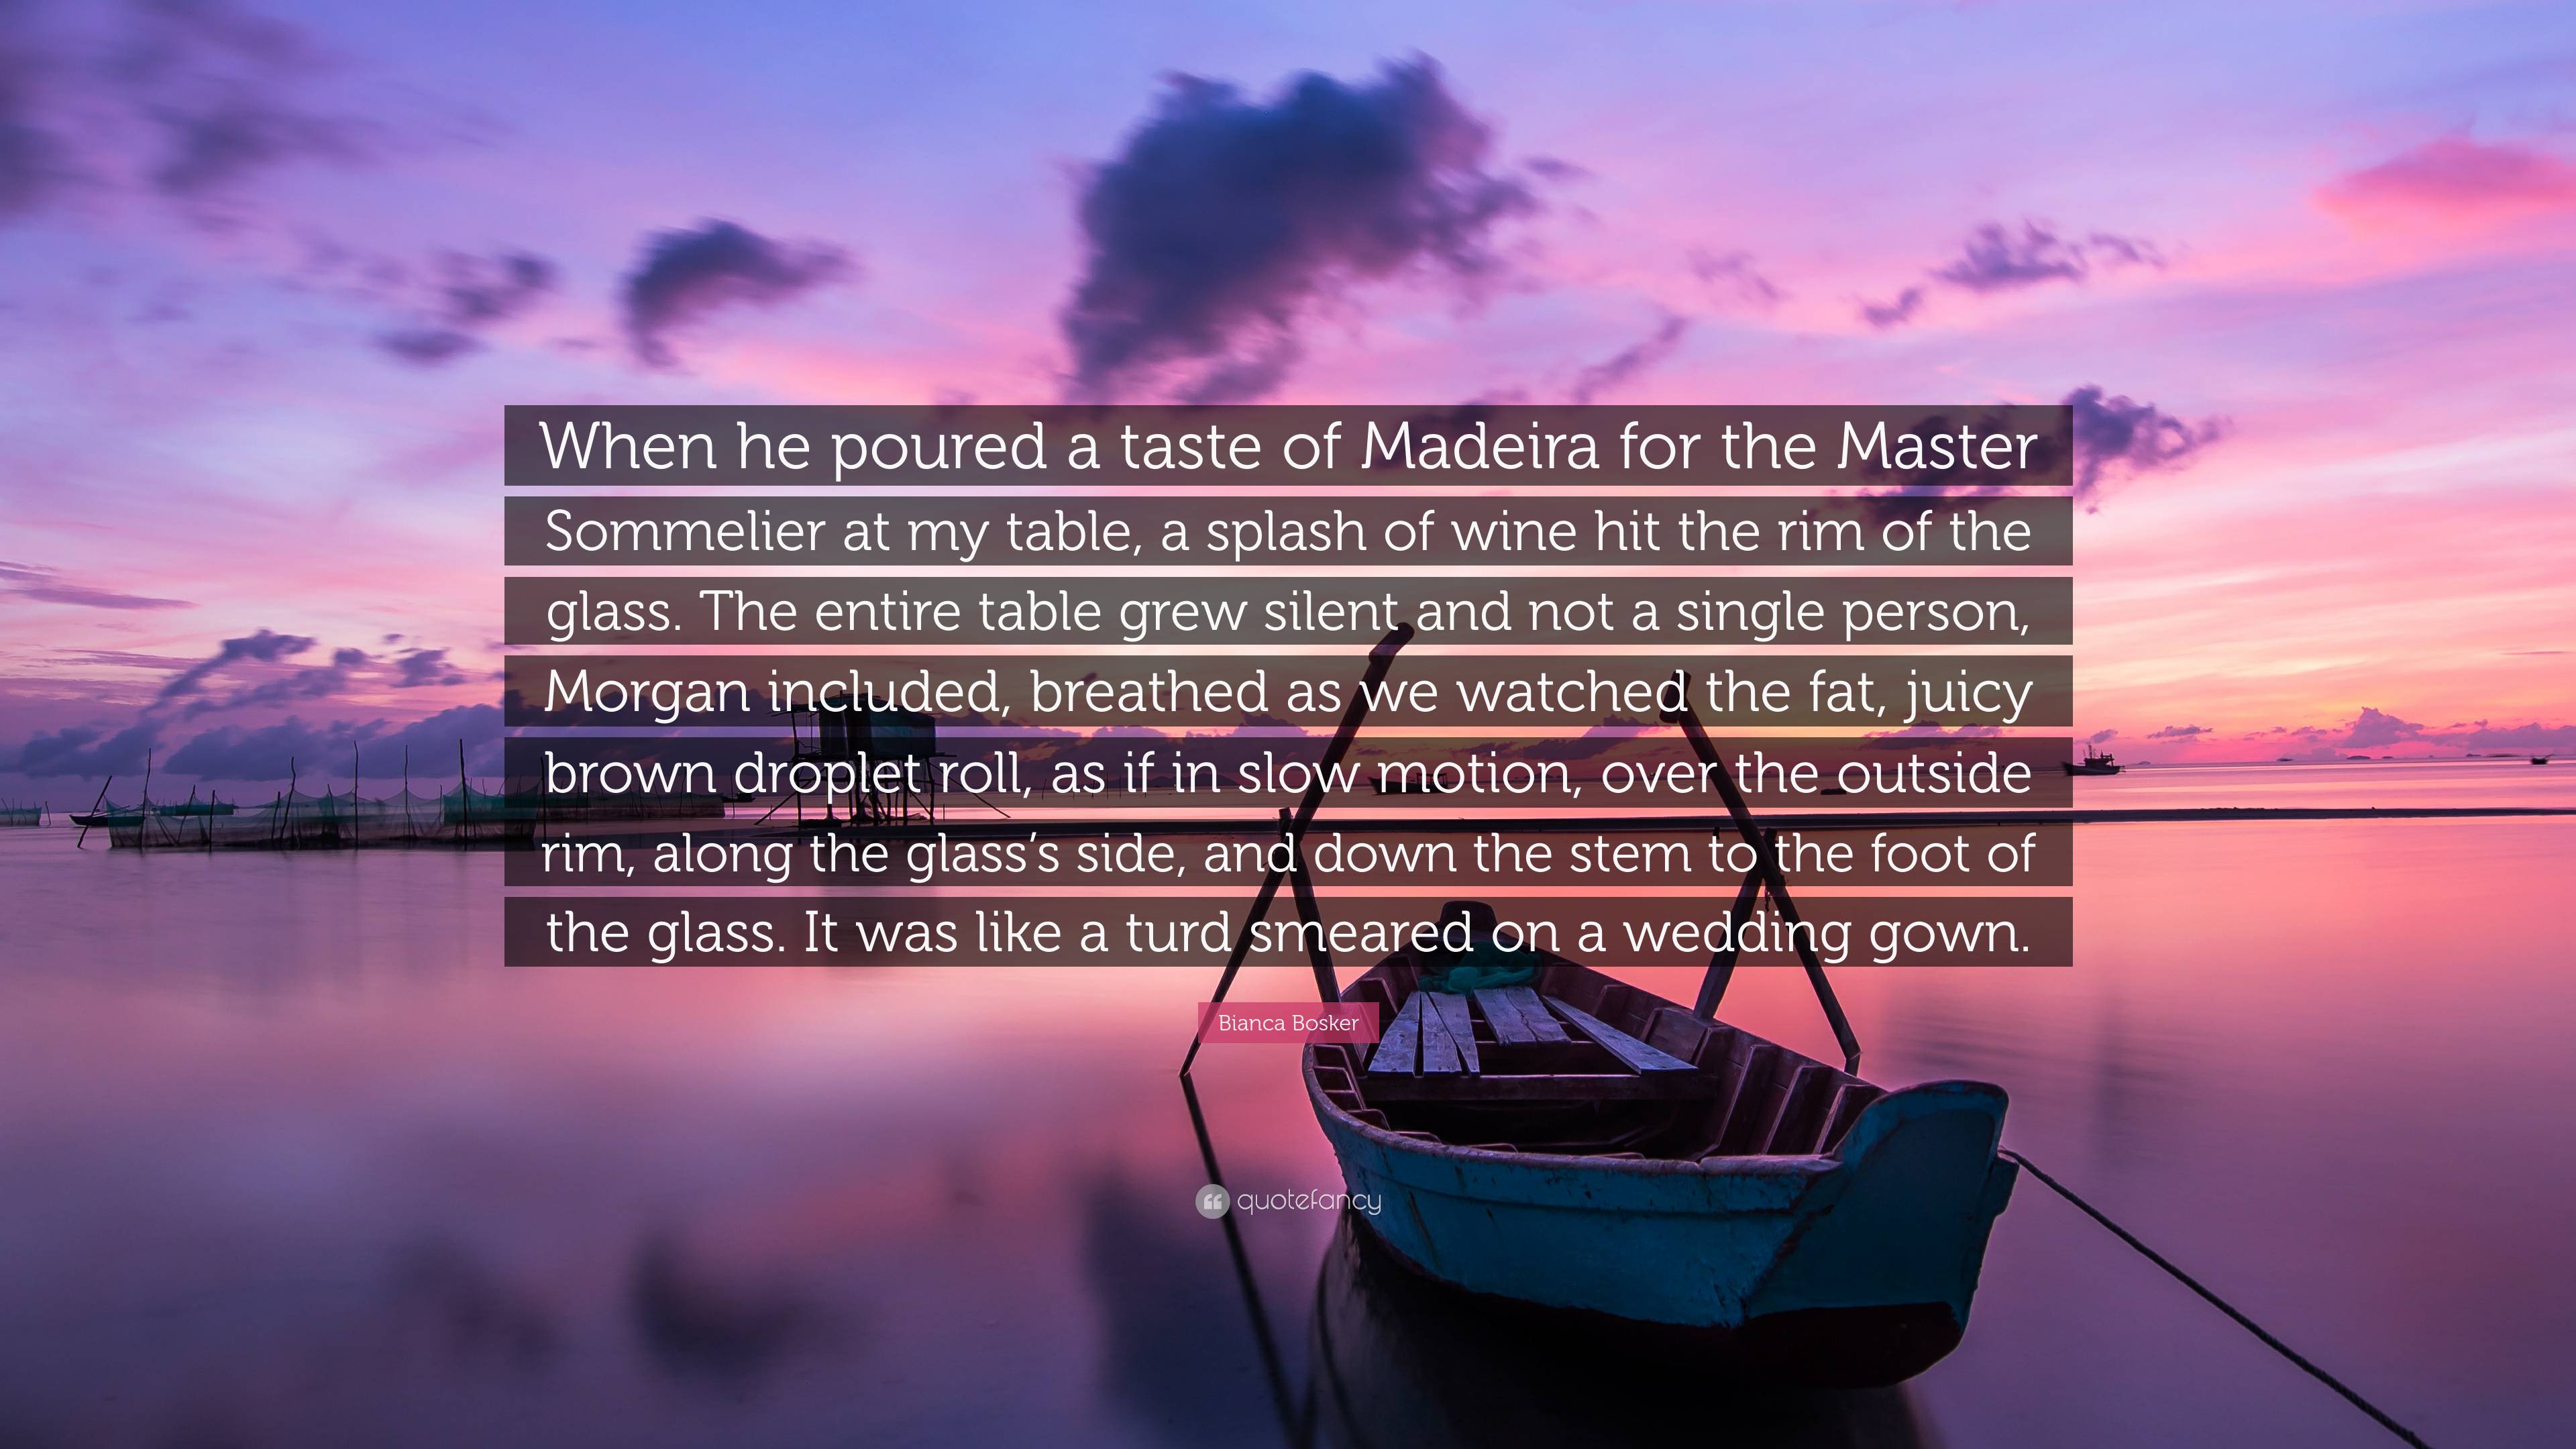 Bianca Bosker Quote: “When he poured a taste of Madeira for the Master ...